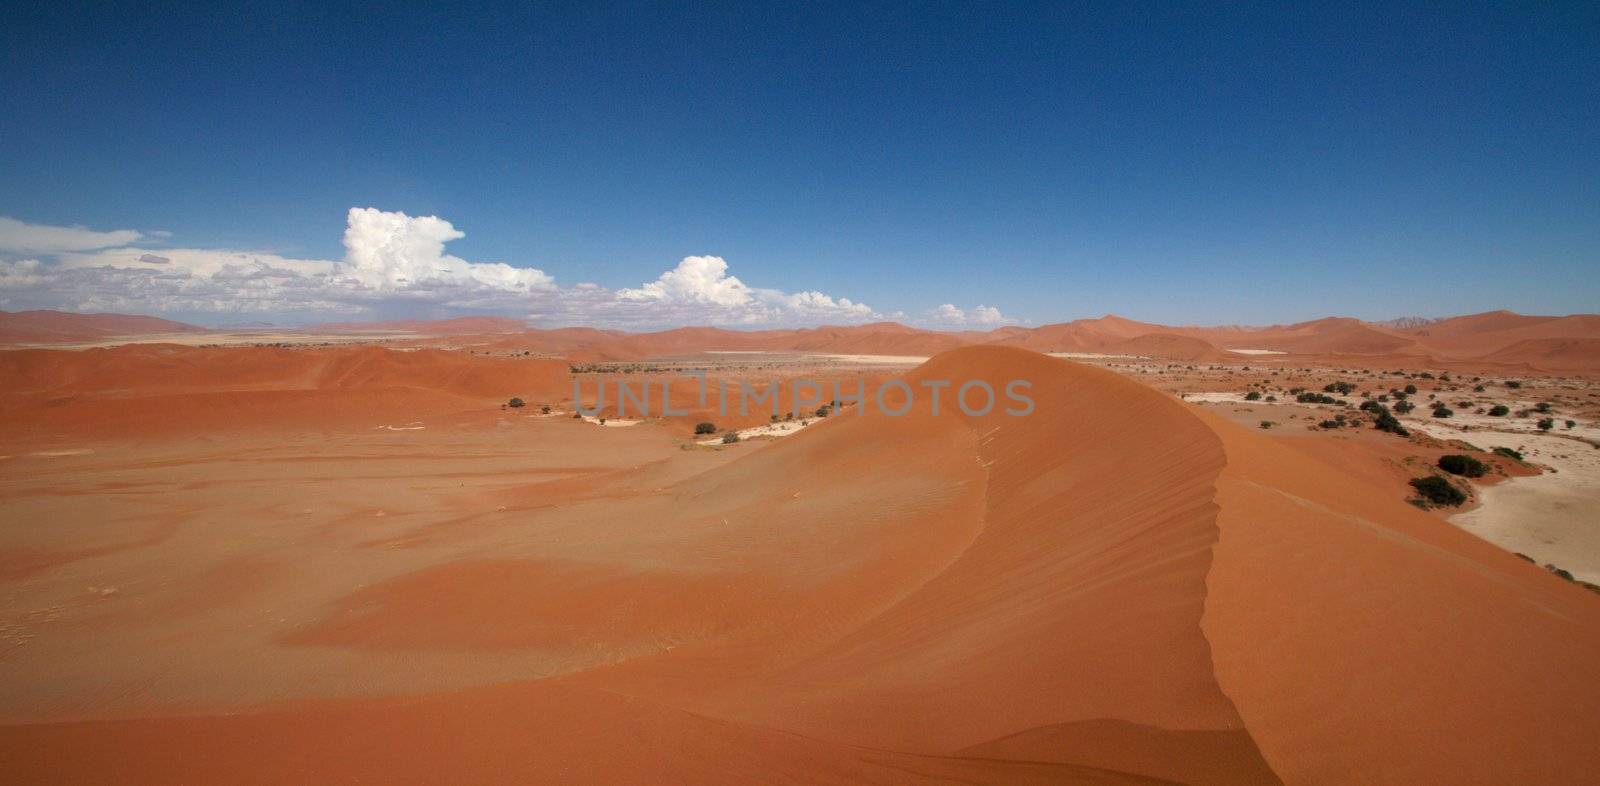 Dune sea of the Namib desert during a hot day
